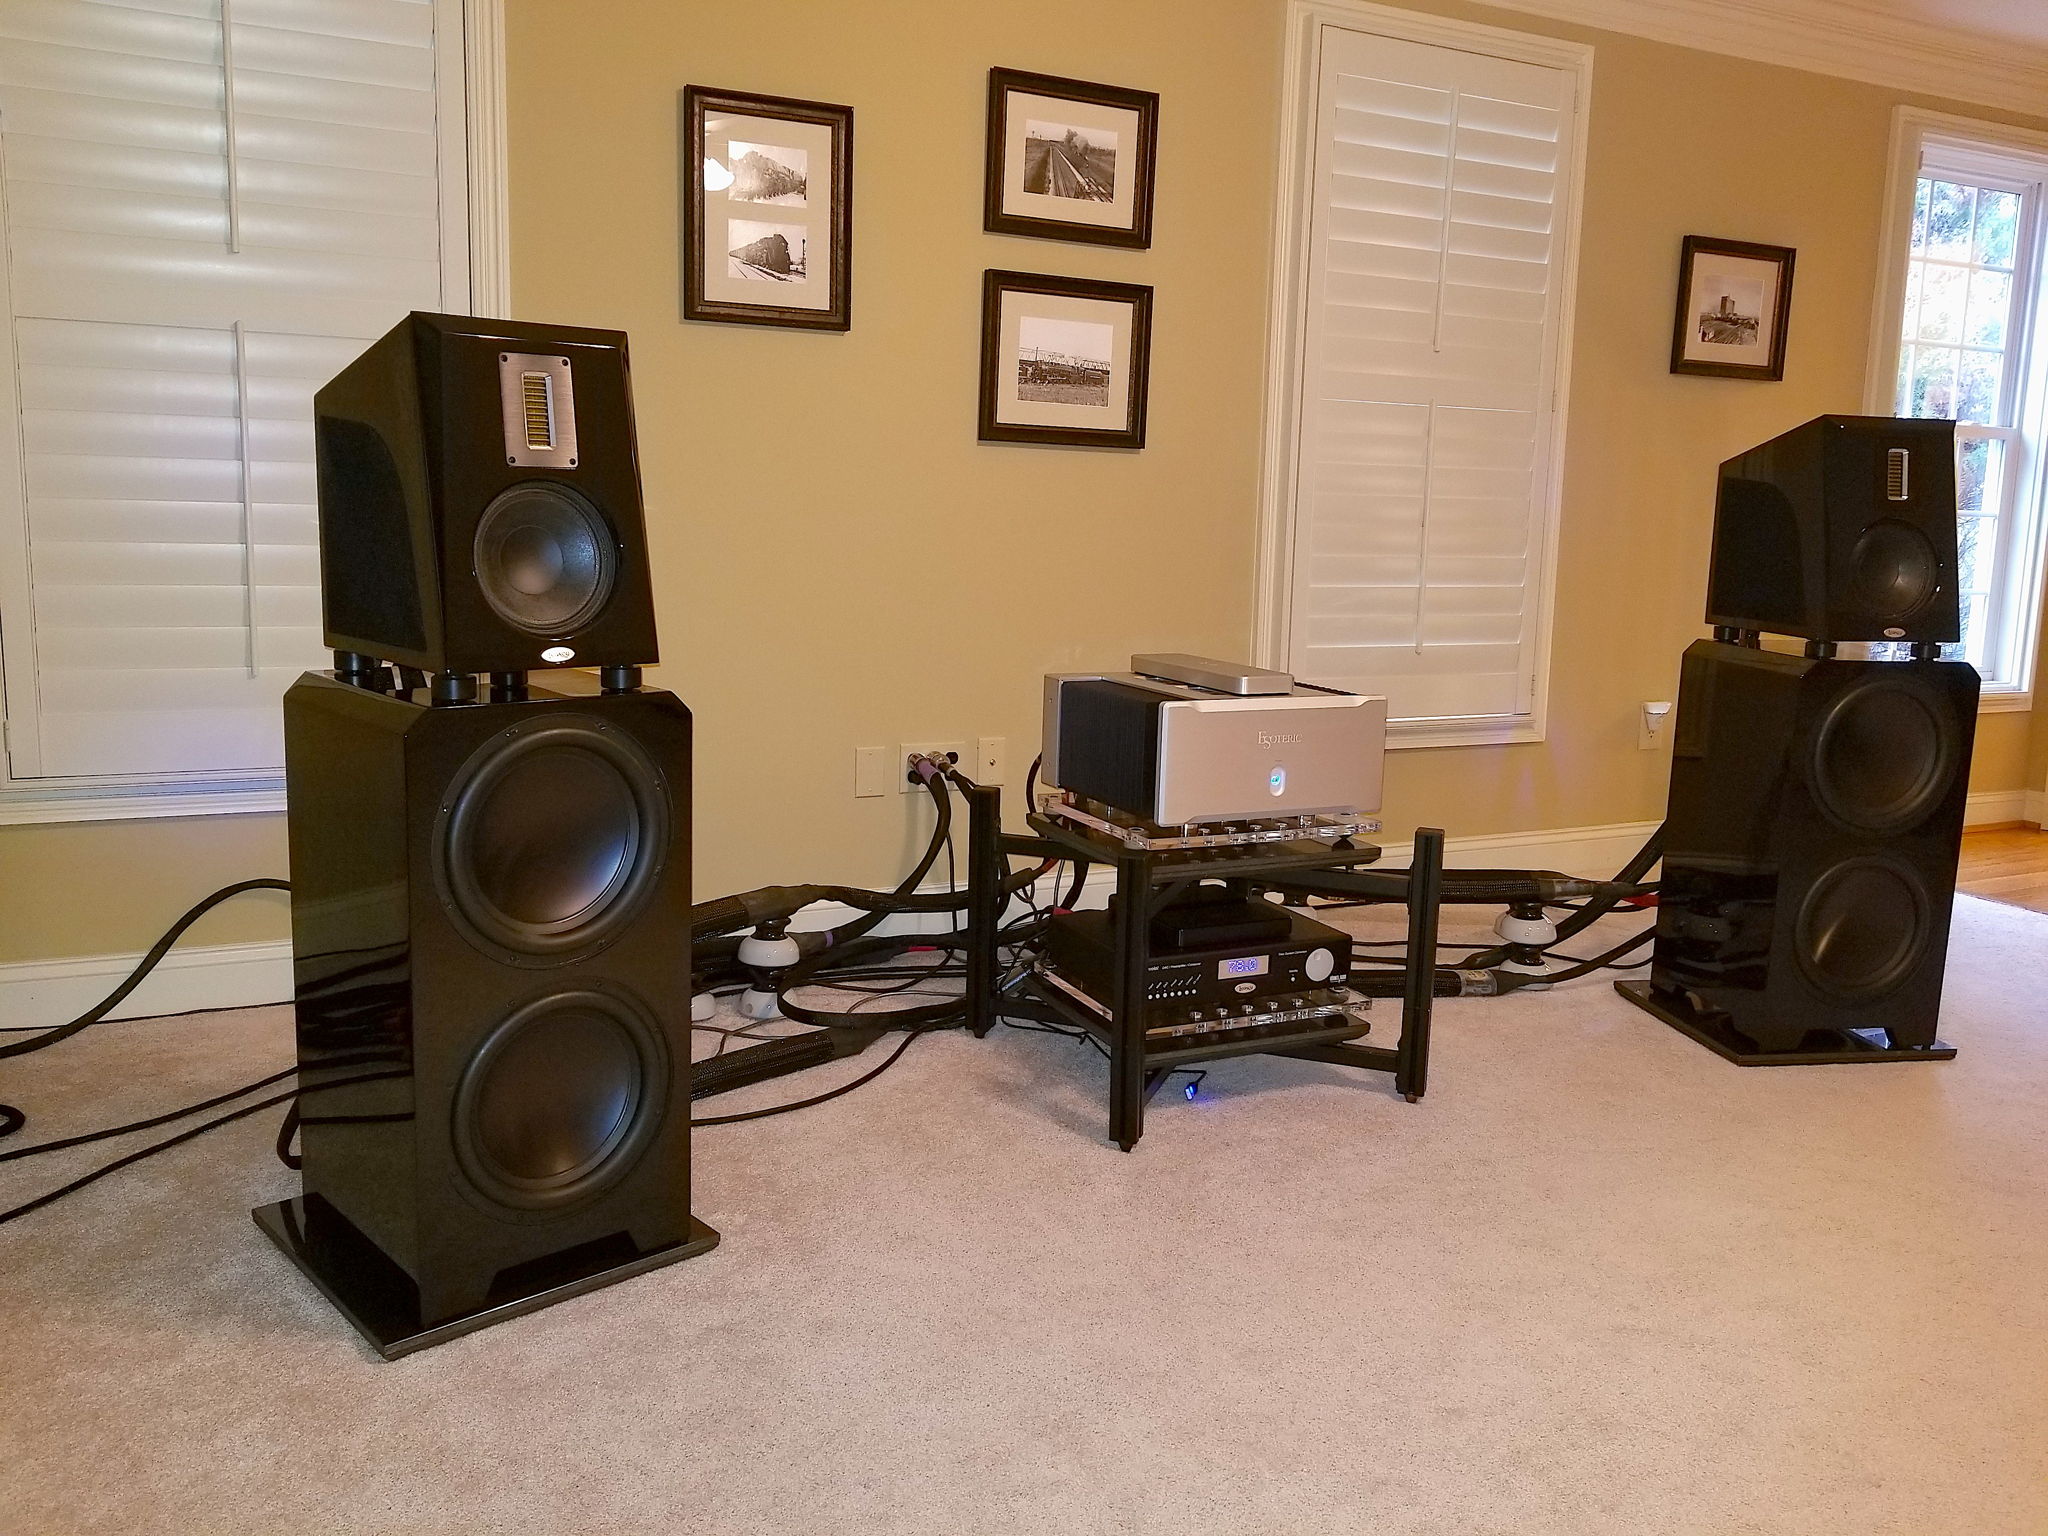 System View from left with new Legacy Calibre XD & Foundation speakers (custom)